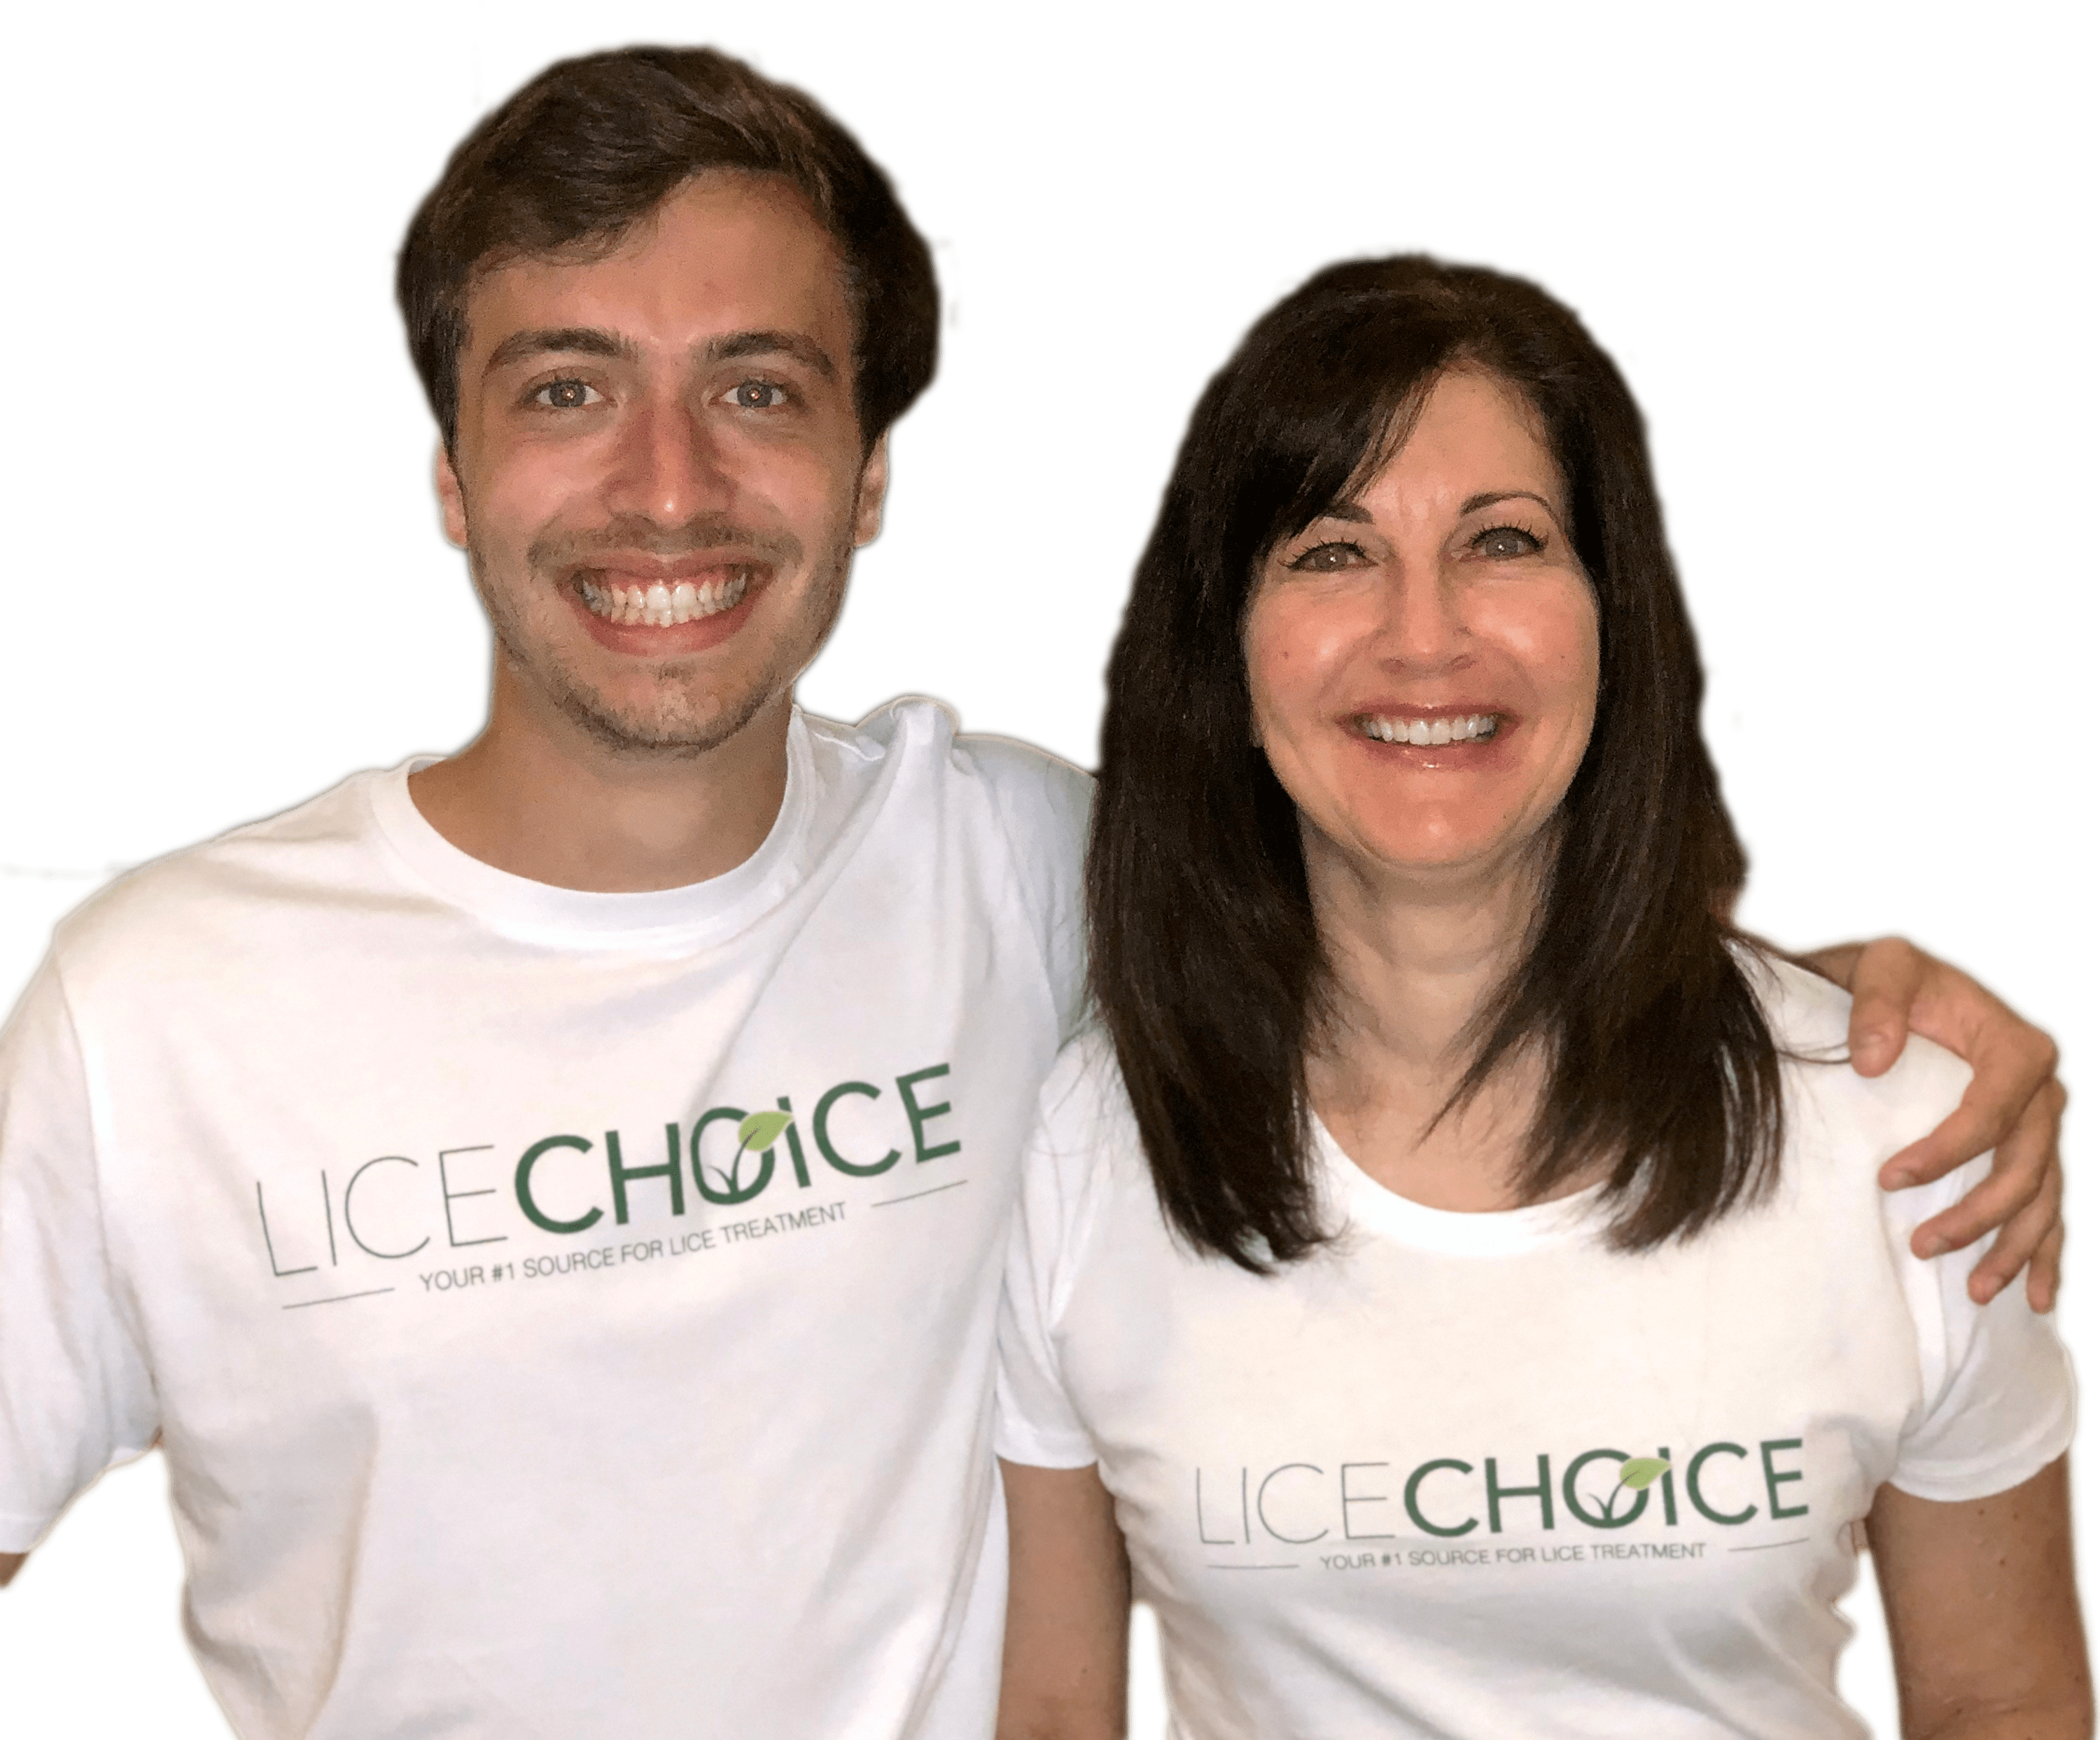 Founders of Lice Choice Michelle and Jacob Appelbaum